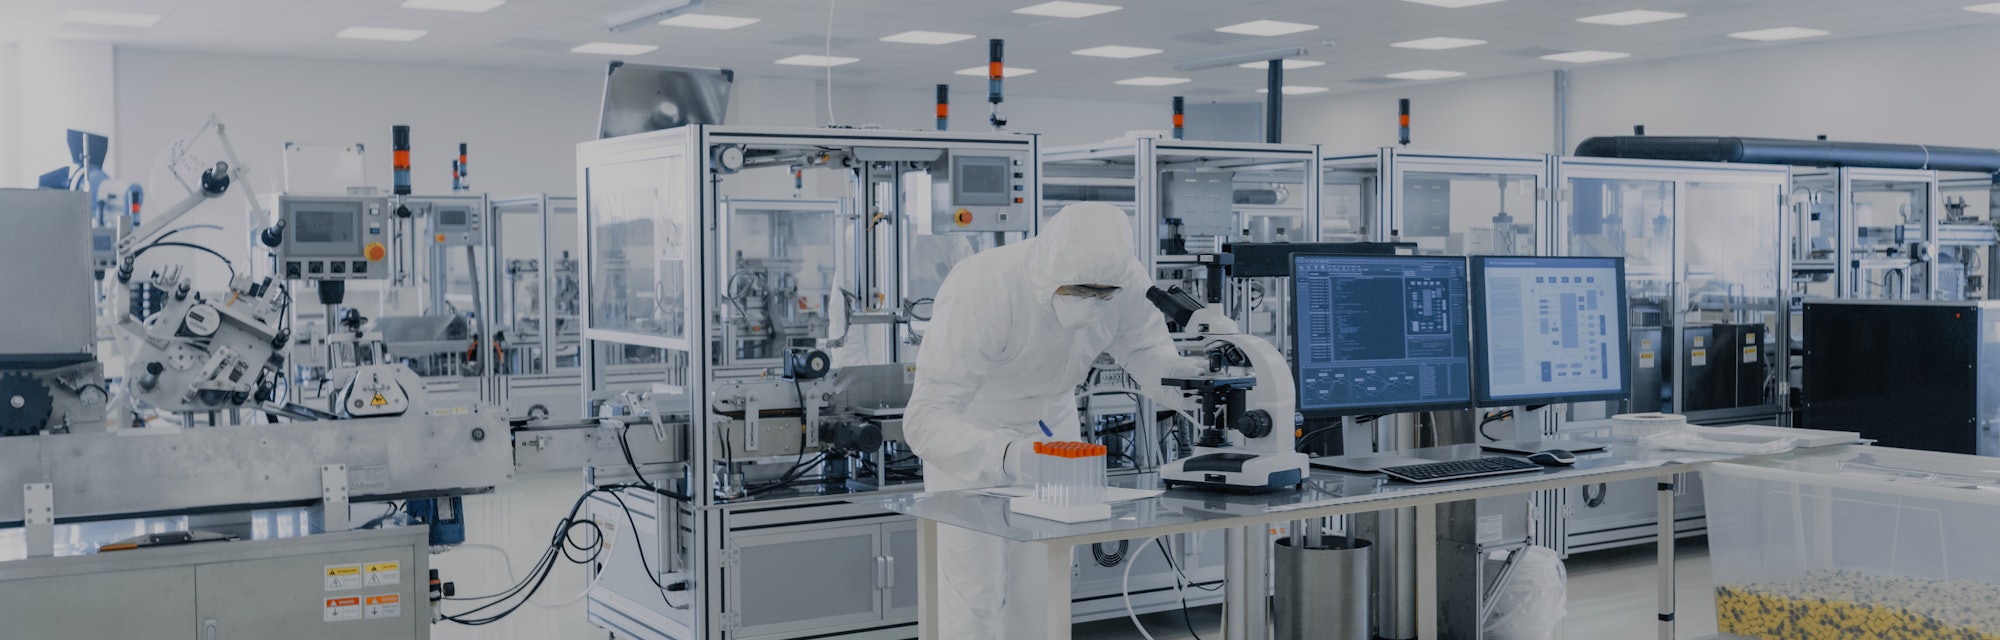 Shot of Sterile Pharmaceutical Manufacturing Laboratory where Scientists in Protective Coverall's Do...